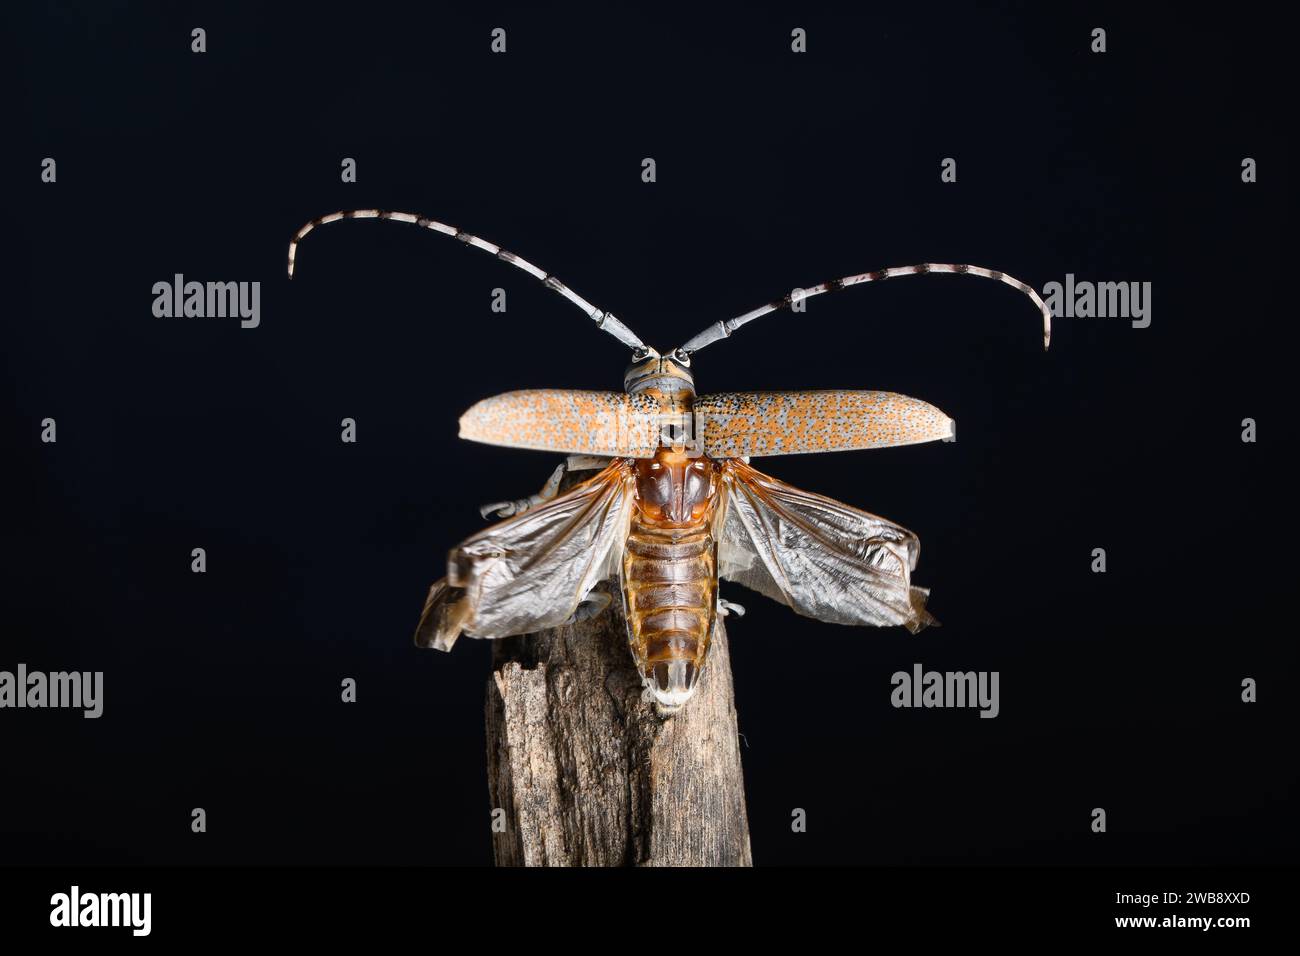 A Longhorn Beetle (Batocera rufomaculata) spreads its wings atop a wooden perch, poised for flight against a dark backdrop. Stock Photo